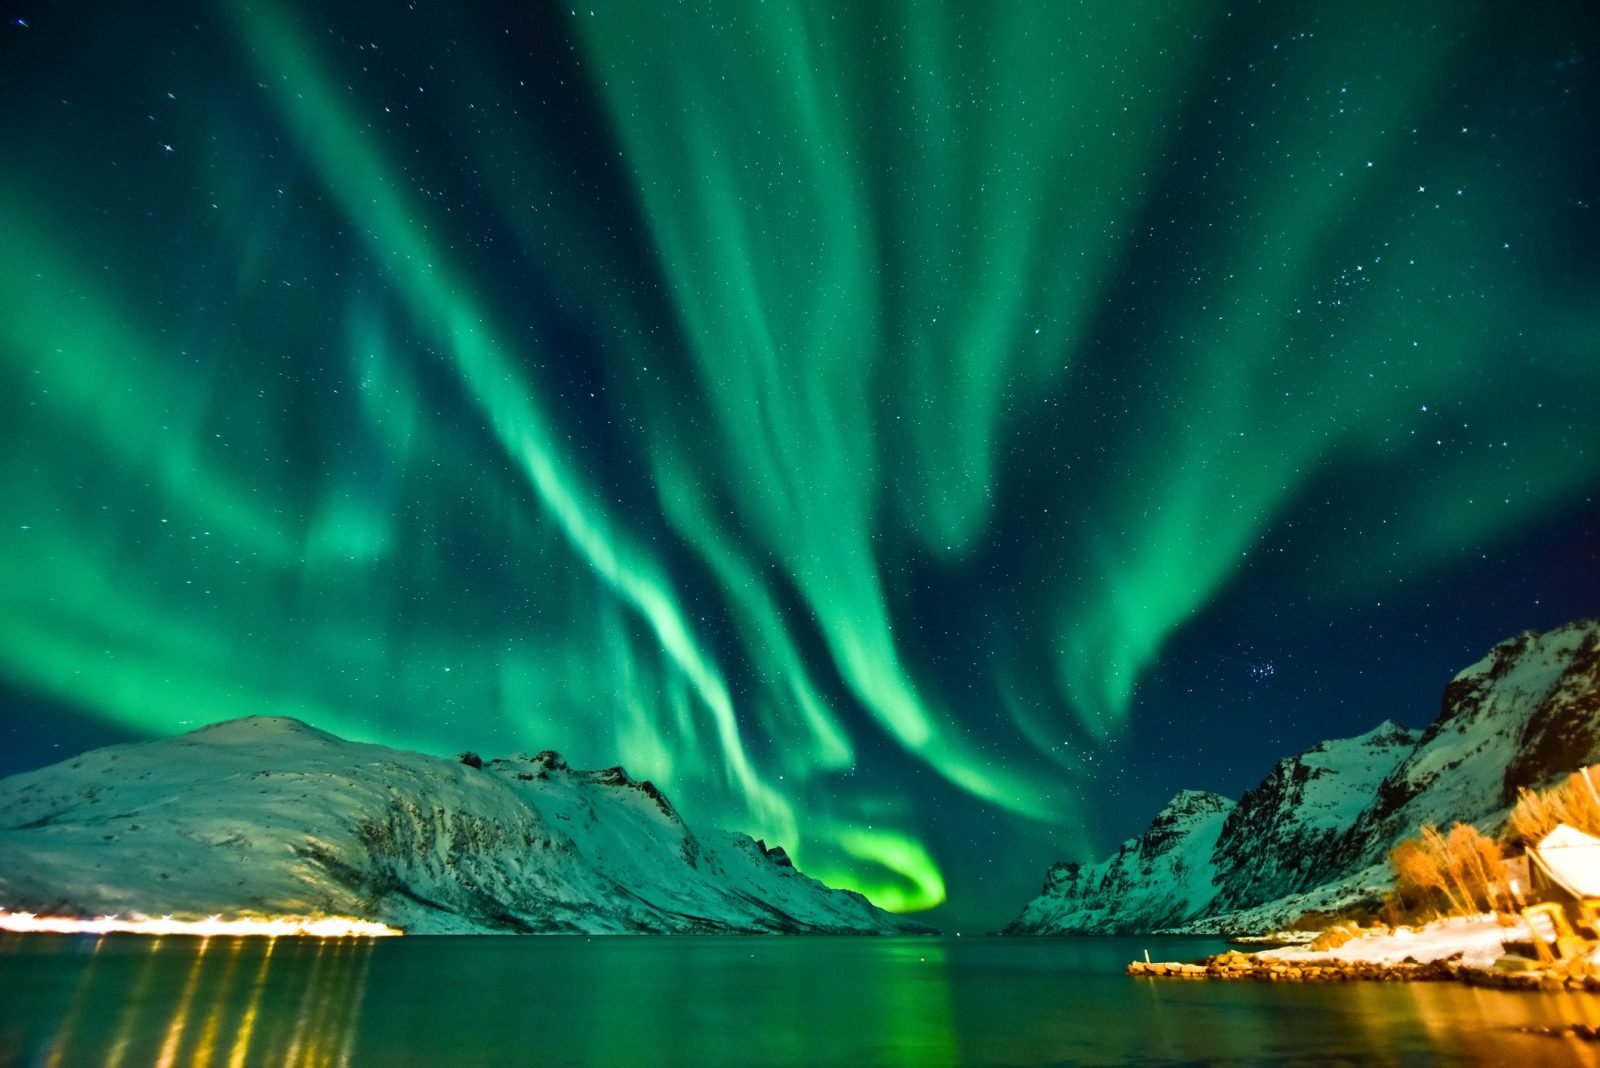 The Northern lights in Tromso